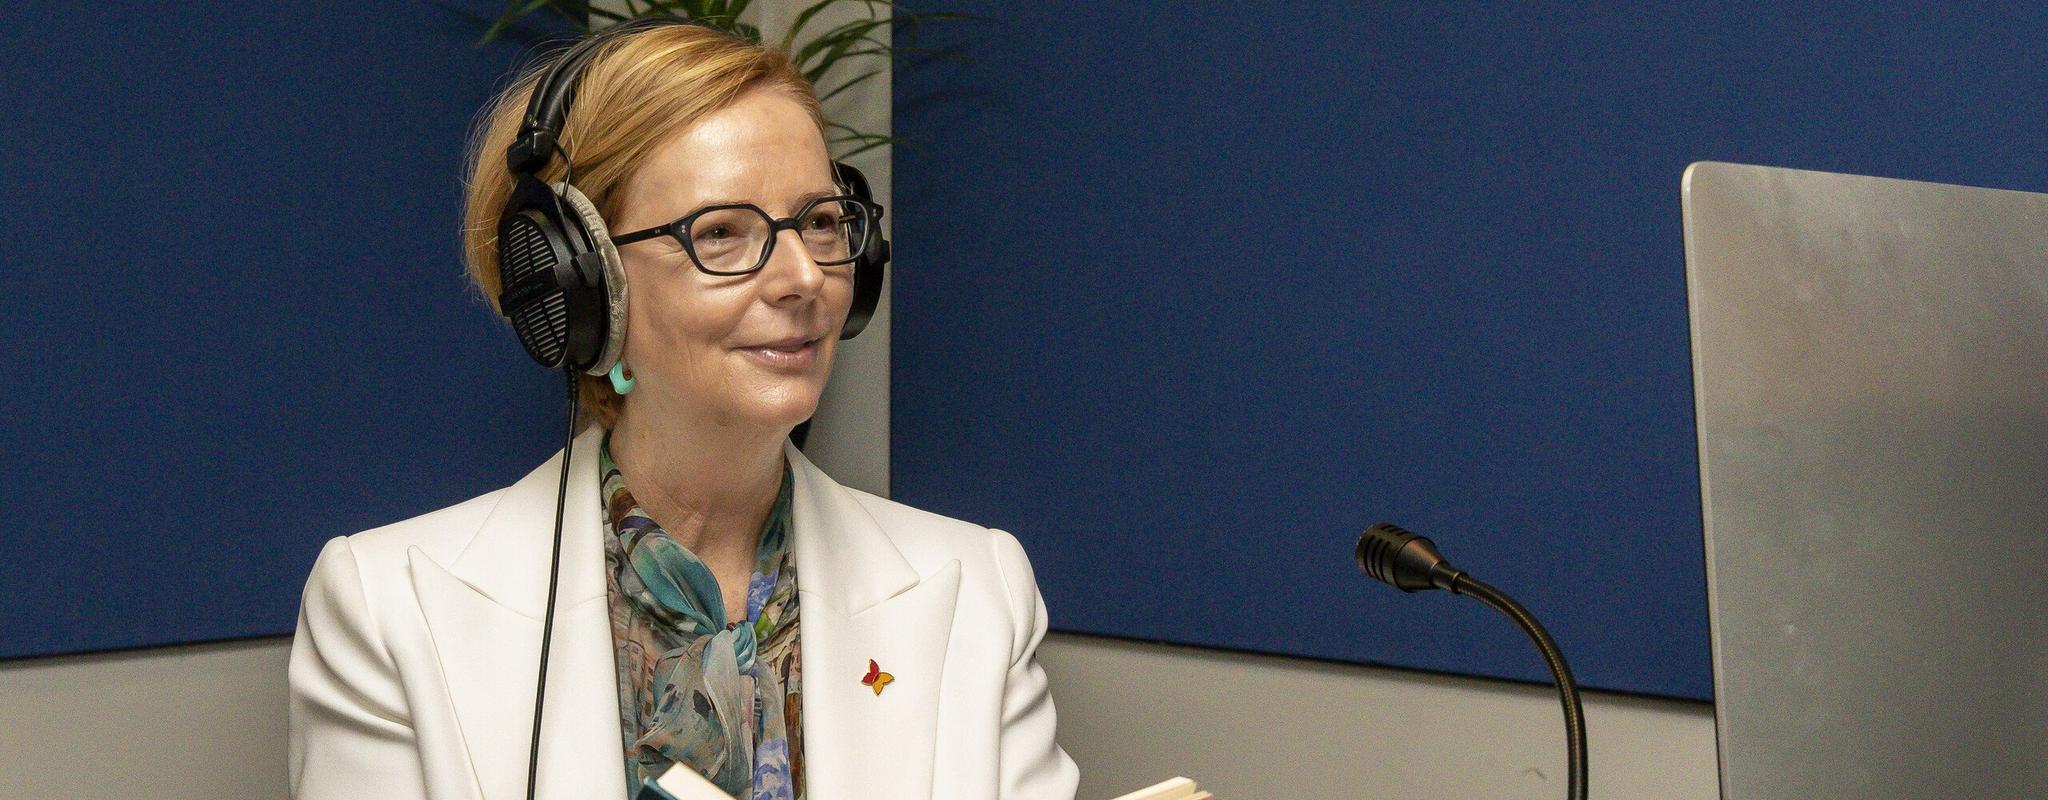 Julia Gillard sits at a sound desk wearing large headphones, ready to speak into a microphone. She's holding an open book.